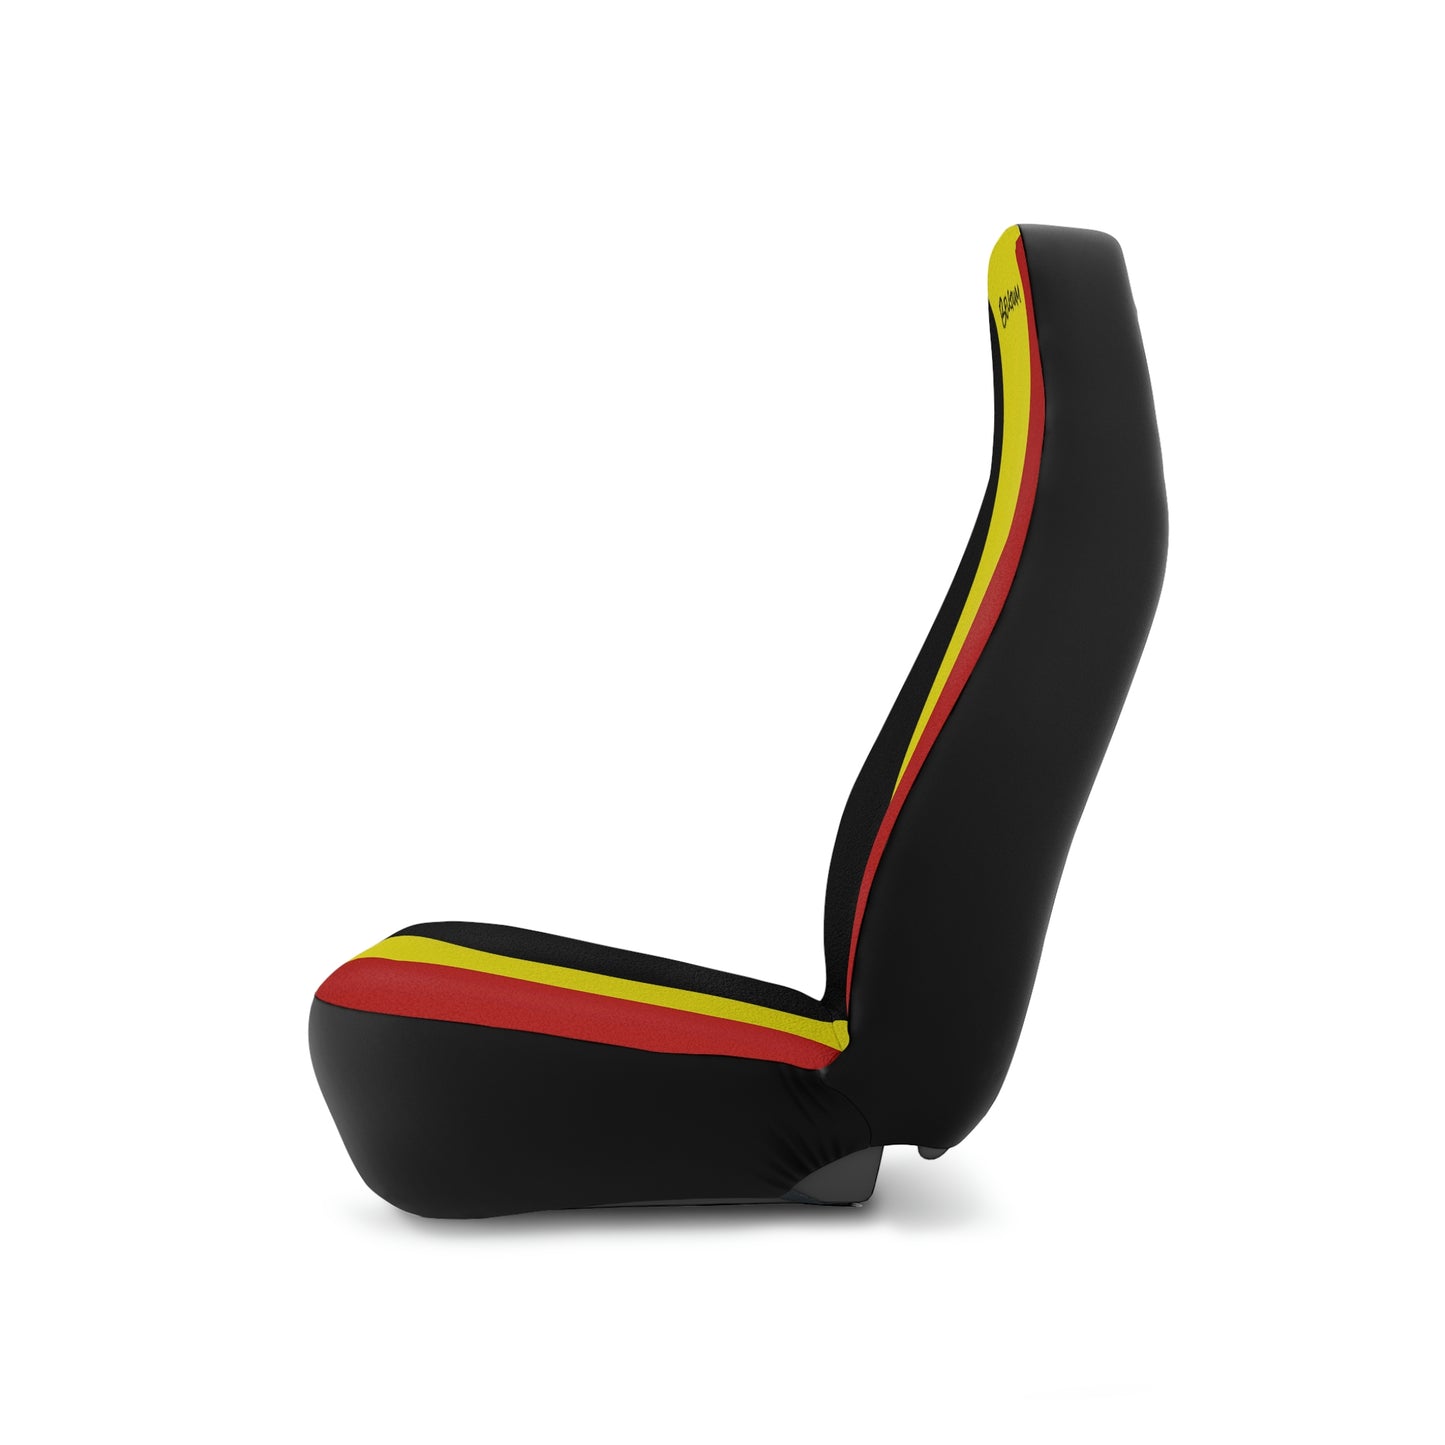 Belgium Flag Car Seat Covers Universal / Gift for car lovers